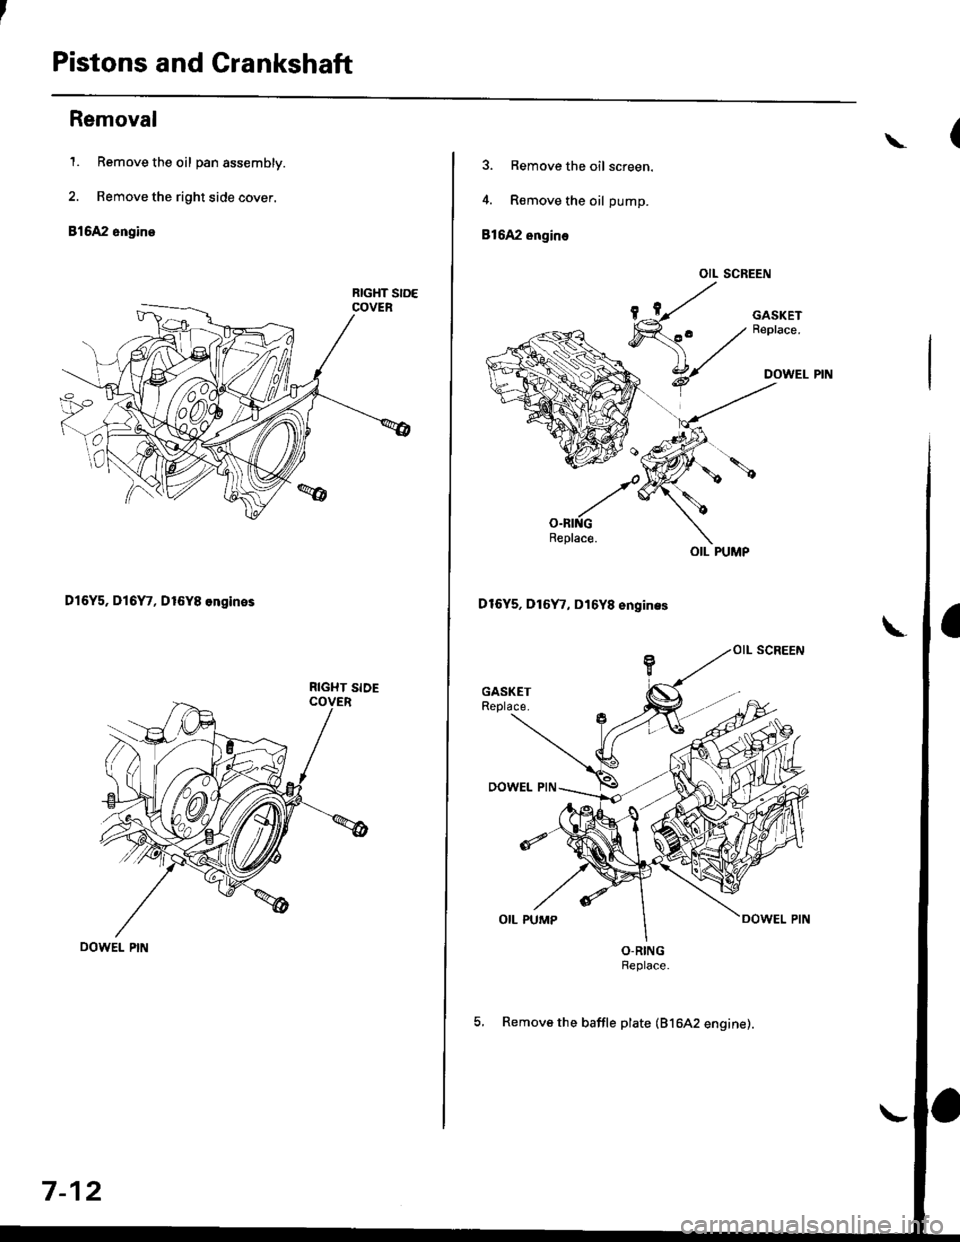 HONDA CIVIC 1999 6.G Owners Guide Pistons and Crankshaft
Removal
1. Remove the oil pan assembly.
2. Remove the right side cover.
816A2 engine
D16Y5, Dl6Y7, D16Y8 ongines
RIGHT SIDE
7-12
\
3. Remove the oil screen.
4. R€move the oil 